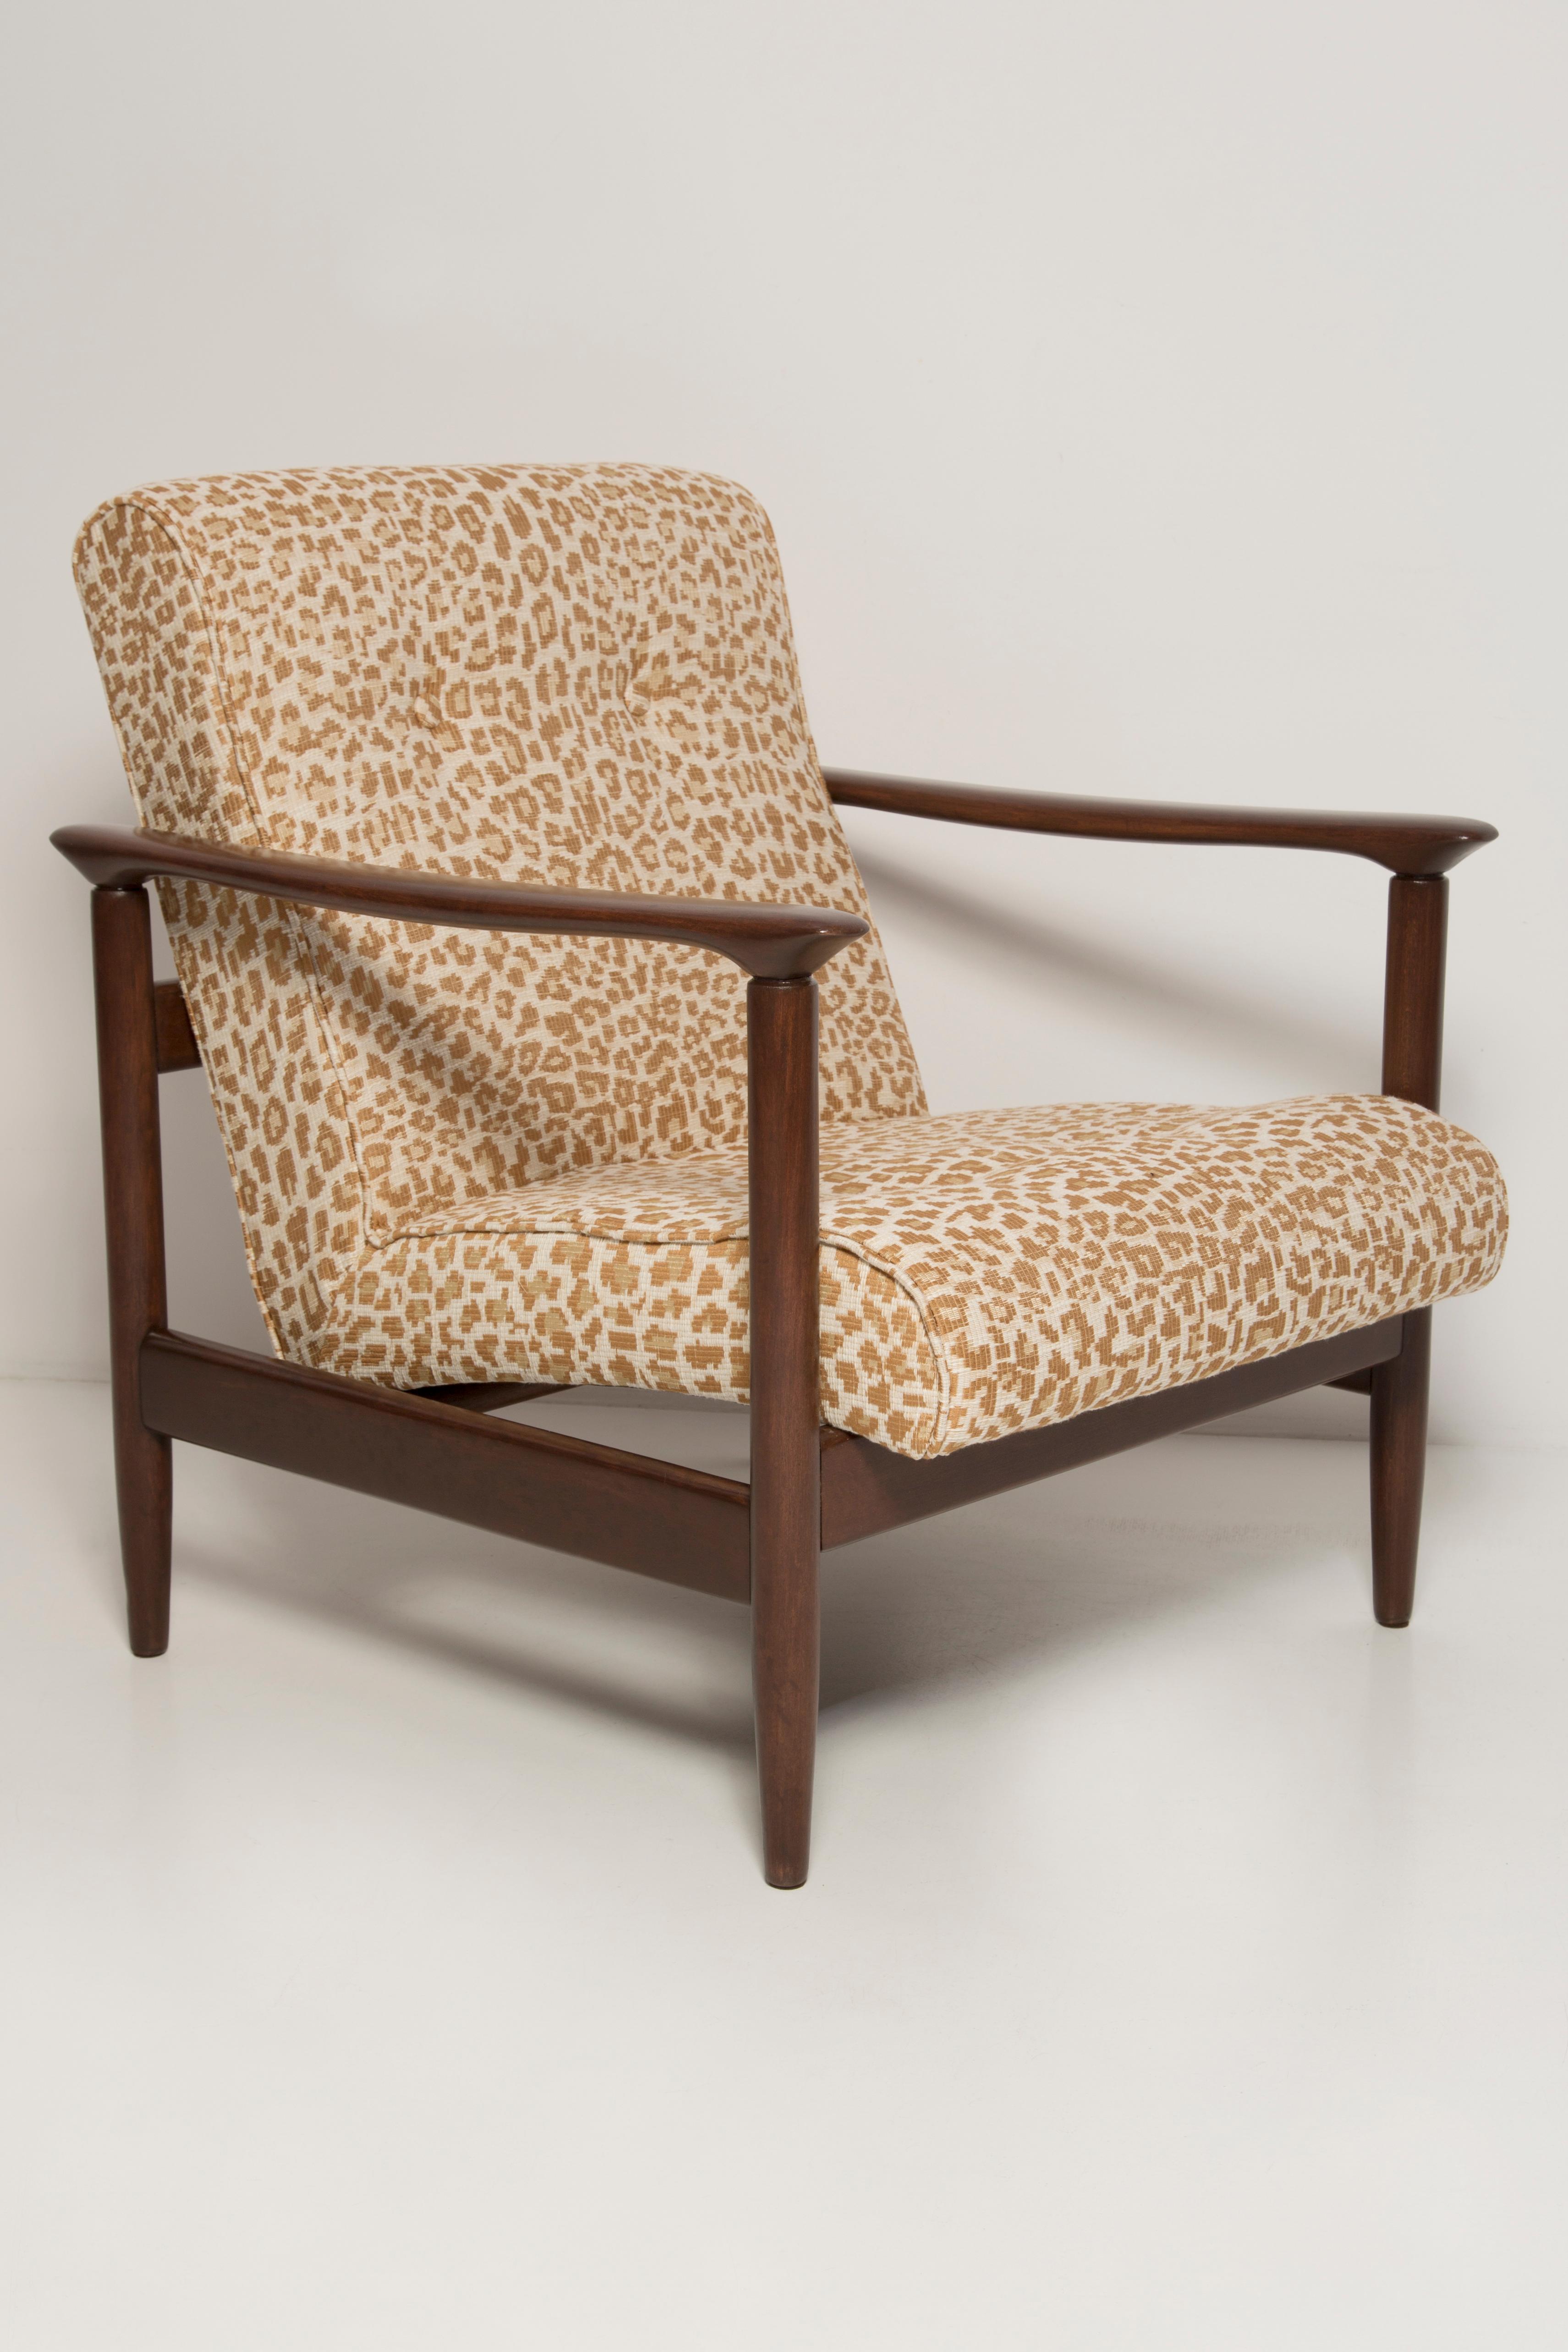 Beautiful leopard armchair GFM-142, designed by Edmund Homa, a polish architect, designer of Industrial Design and interior architecture, professor at the Academy of Fine Arts in Gdansk. 

The armchair was made in the 1960s in the Gosciecinska